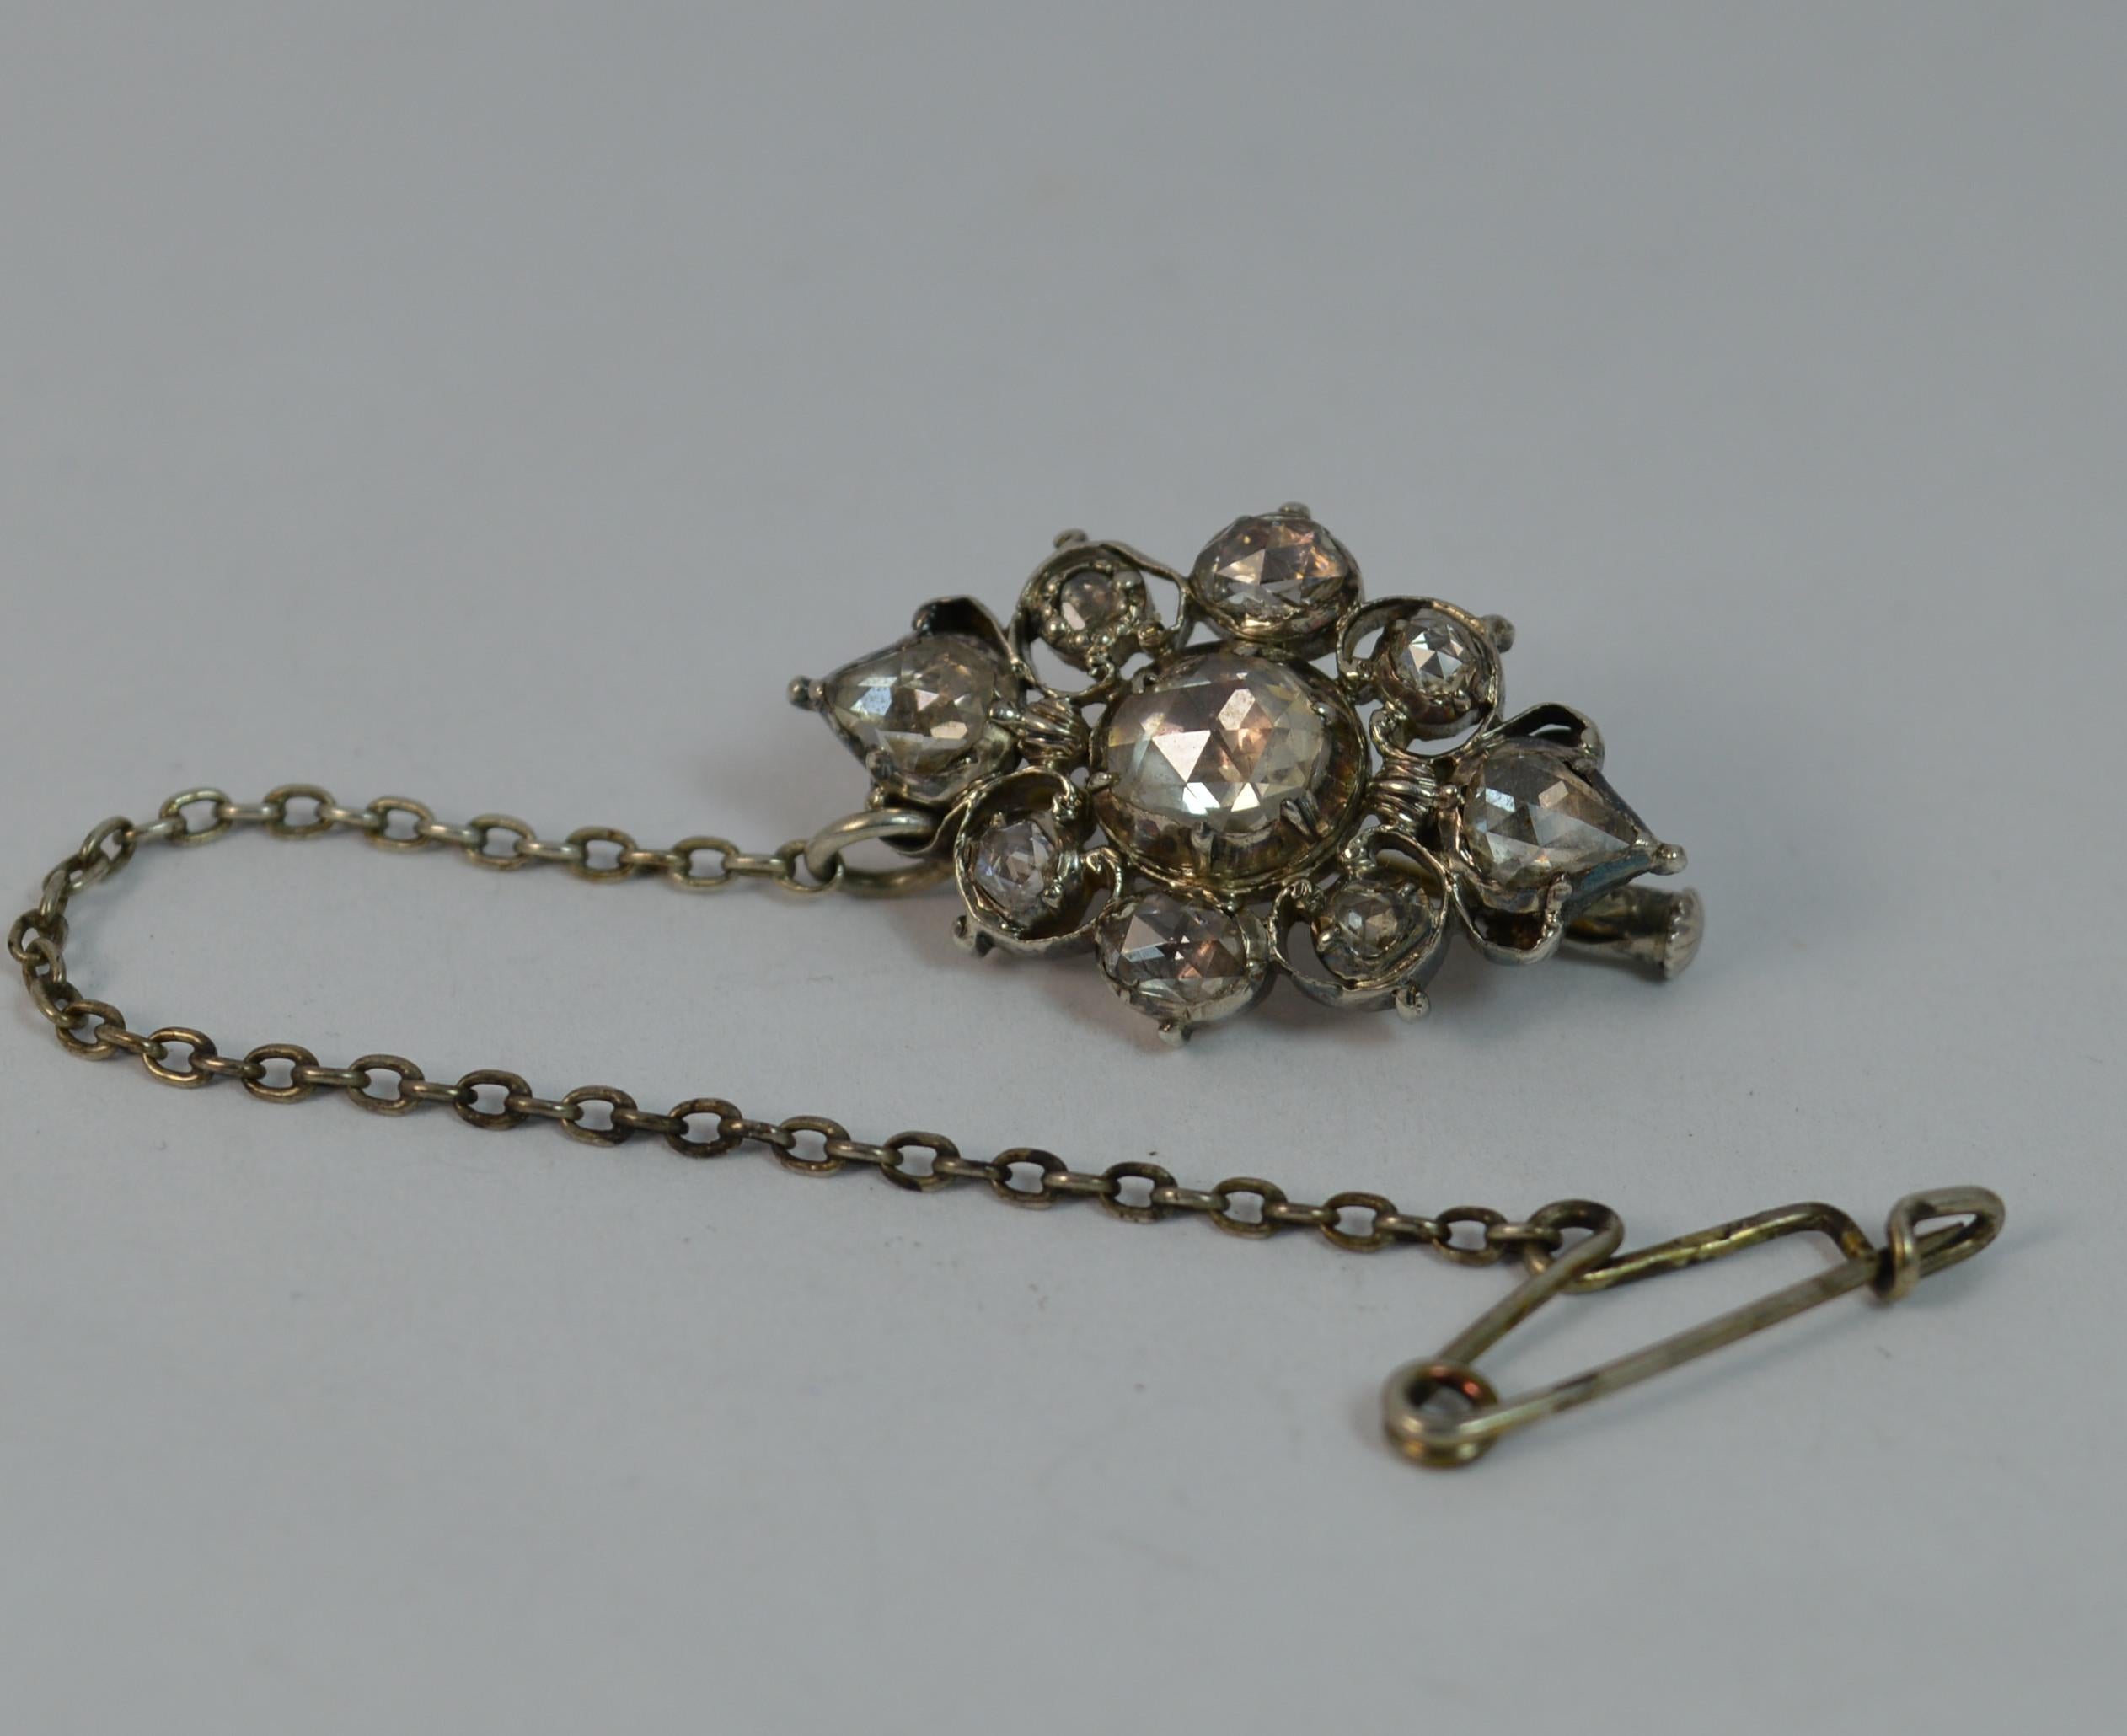 A rare true Georgian period pendant or brooch circa 1770.

Solid 15 carat rose gold example set with silver head setting, typical of the period.

Designed with many natural rose cut diamonds, all original, clean and sparkly. Total spread is the